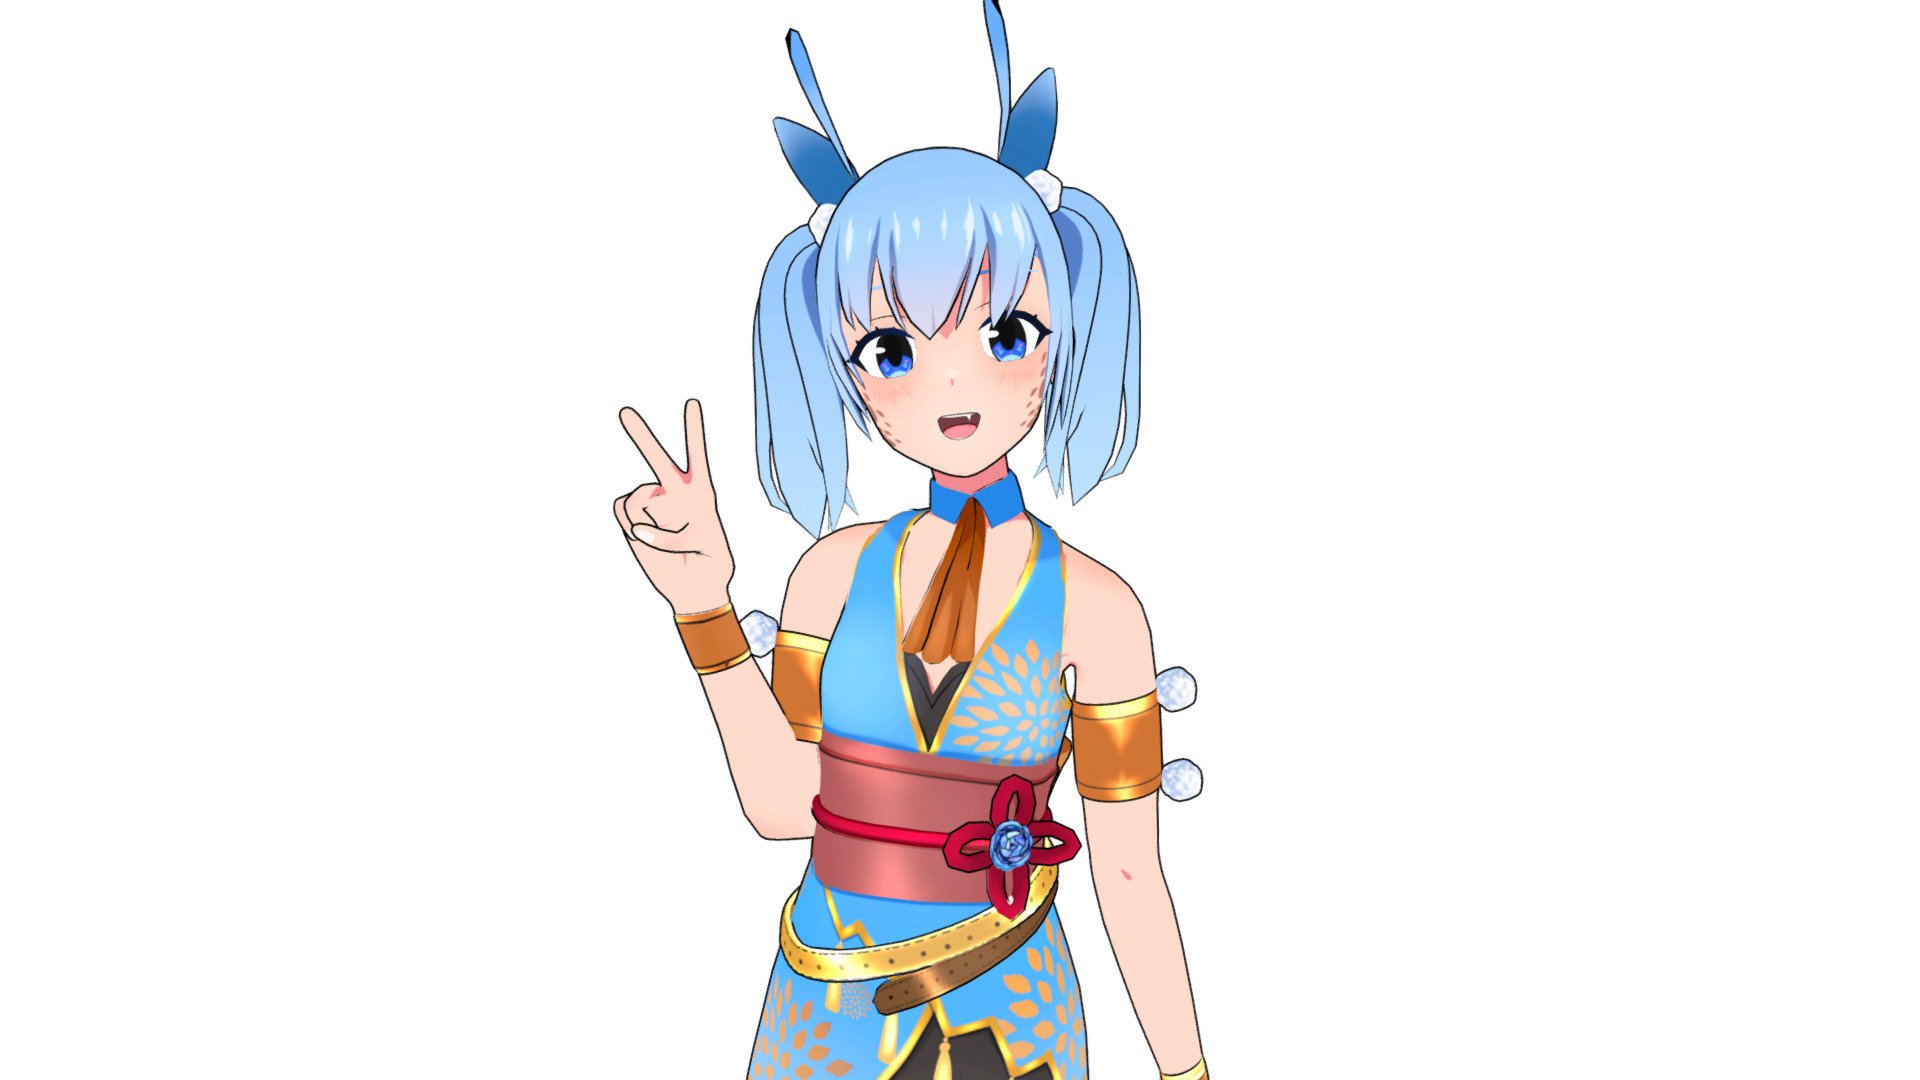 Client commission work for VRChat avatar &amp; Vtuber model. Modelled, Rigged and Textured in blender.

Follow me on Twitter: https://twitter.com/antro3dcg

I'm open for commissions.
My card: https://antro.carrd.co


 - Oni - Commission Work - 3D model by Antro (@Antro3d) 3d model